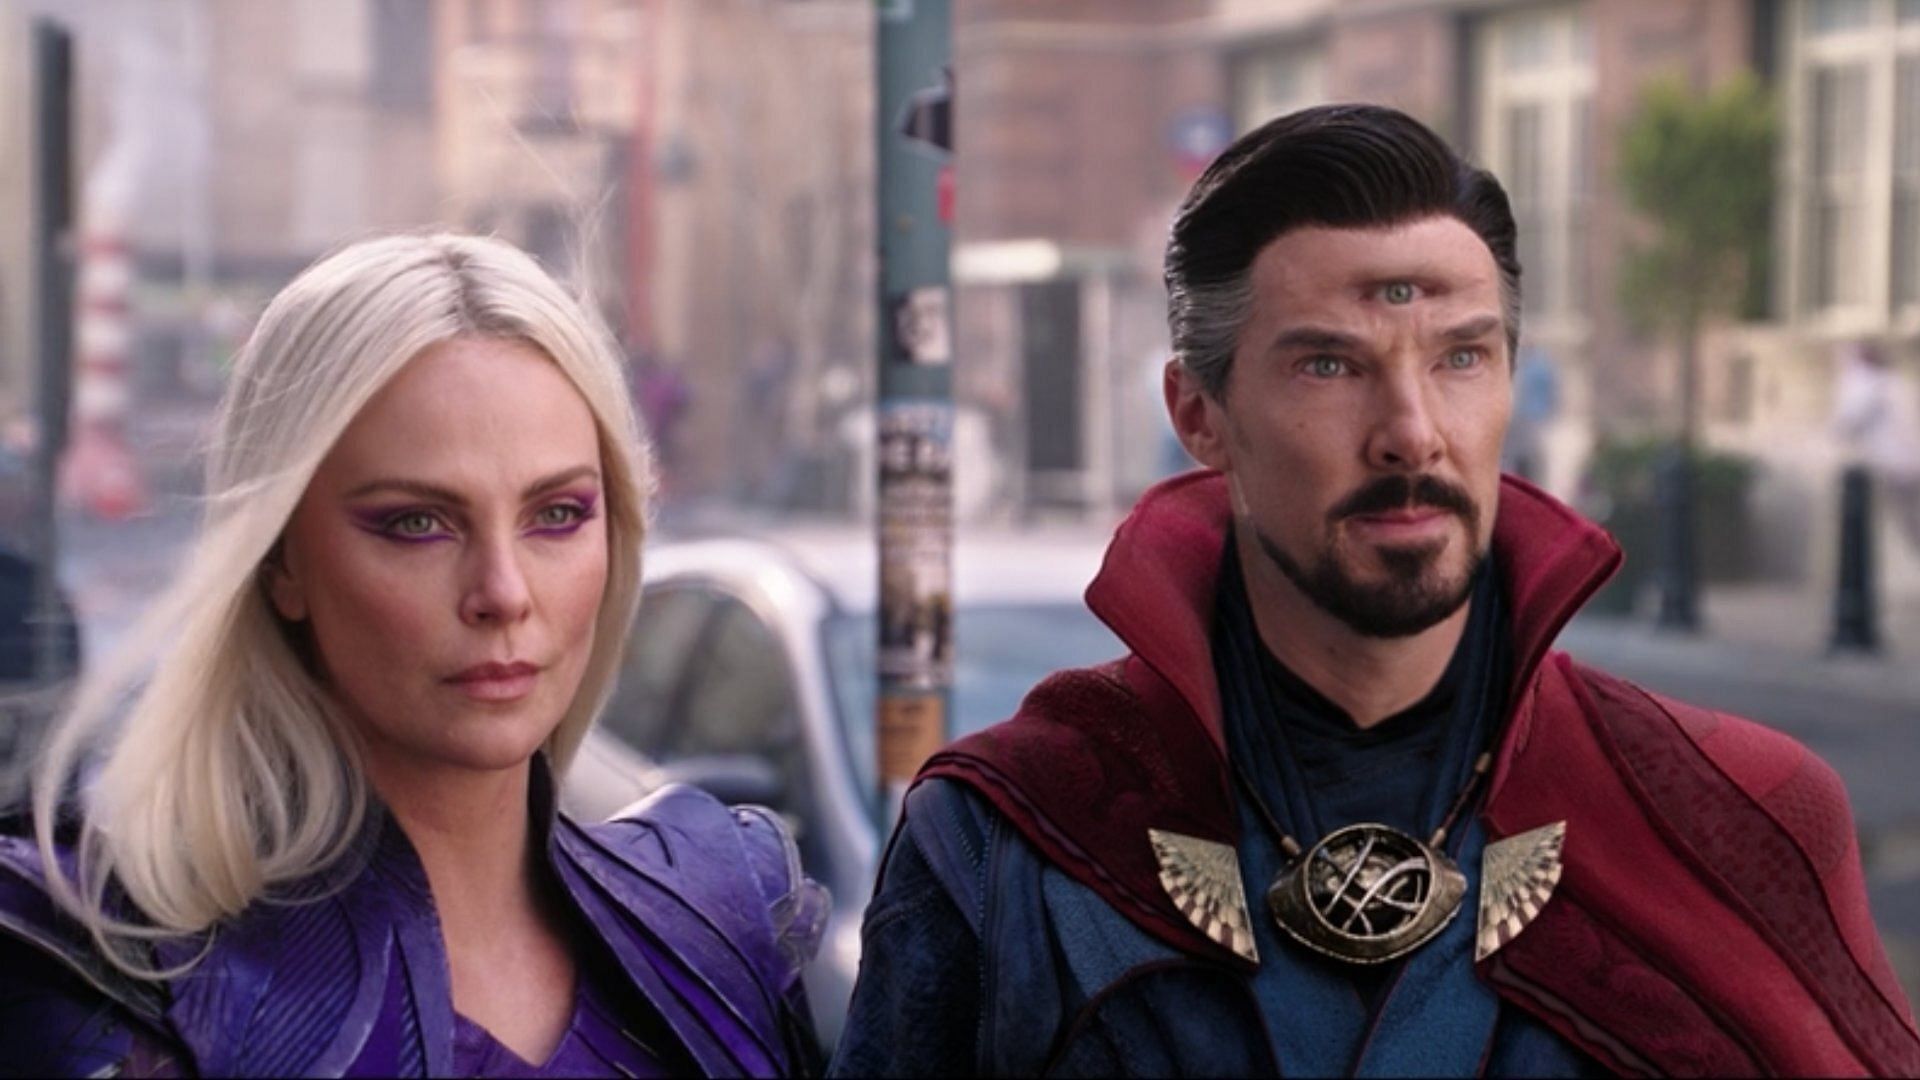 While there has been no official confirmation, Benedict Cumberbatch and Charlize Theron are expected to reprise their roles (Image via Marvel Studios)